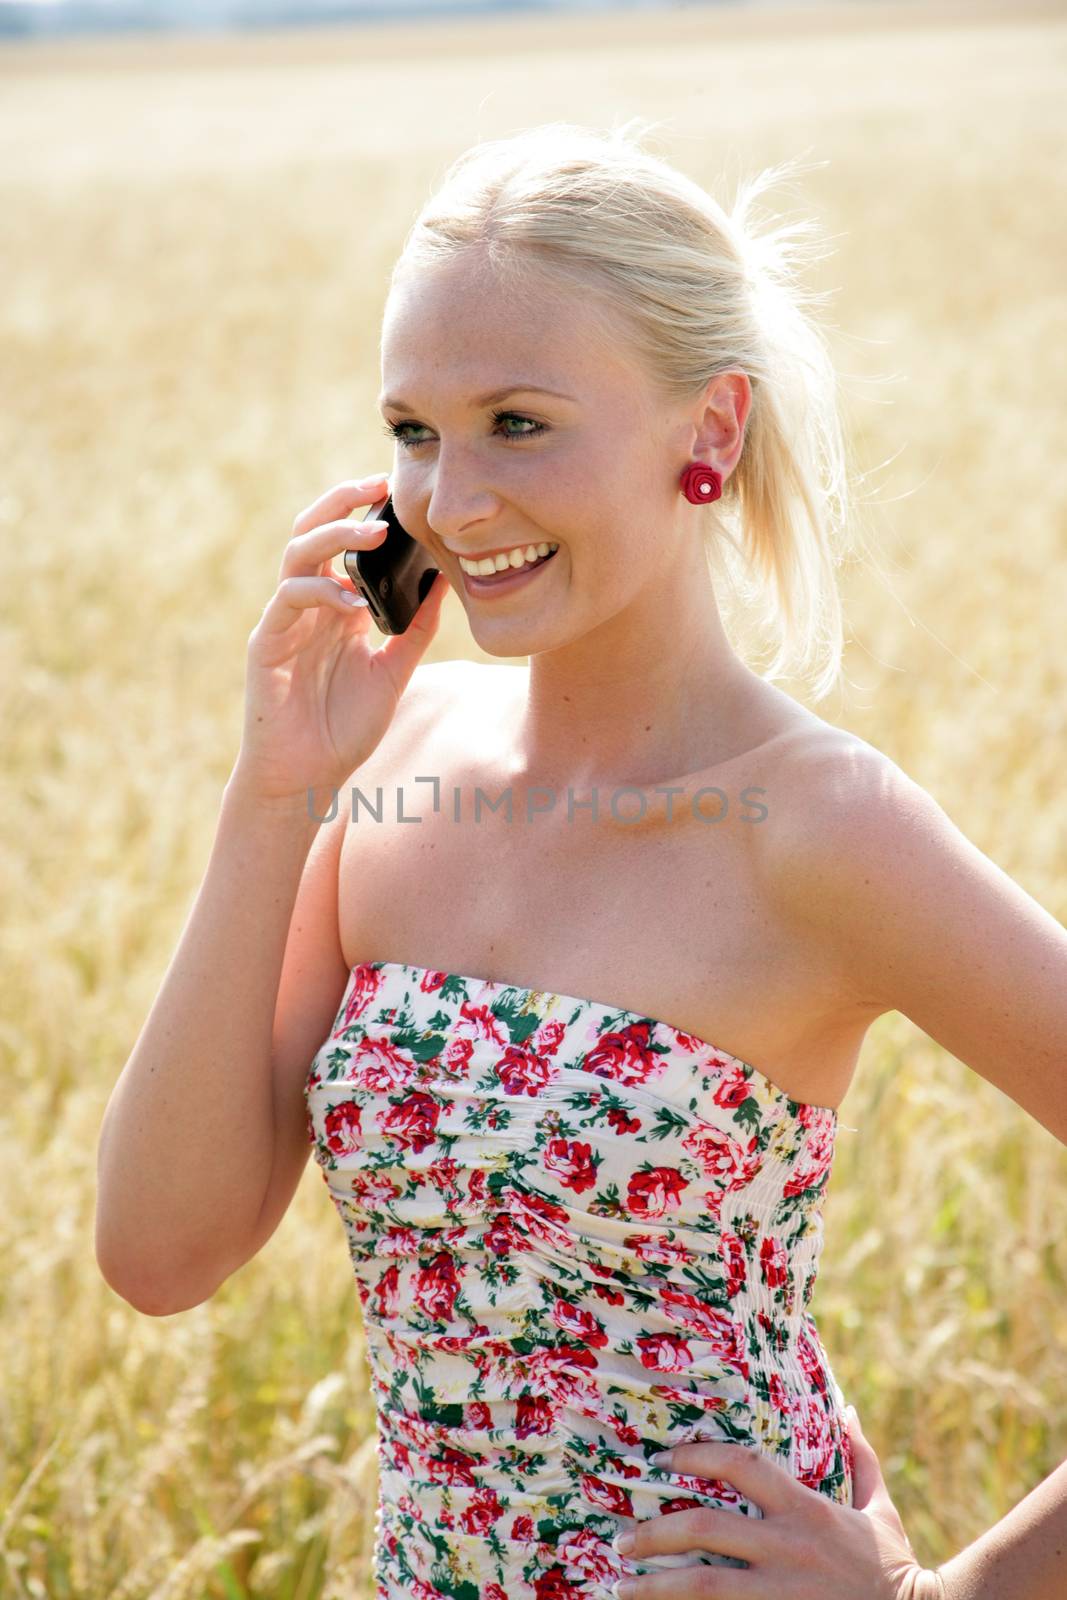 Young attractive woman is standing in a wheat field and speaks into her mobile phone. She looks happy and relaxed.